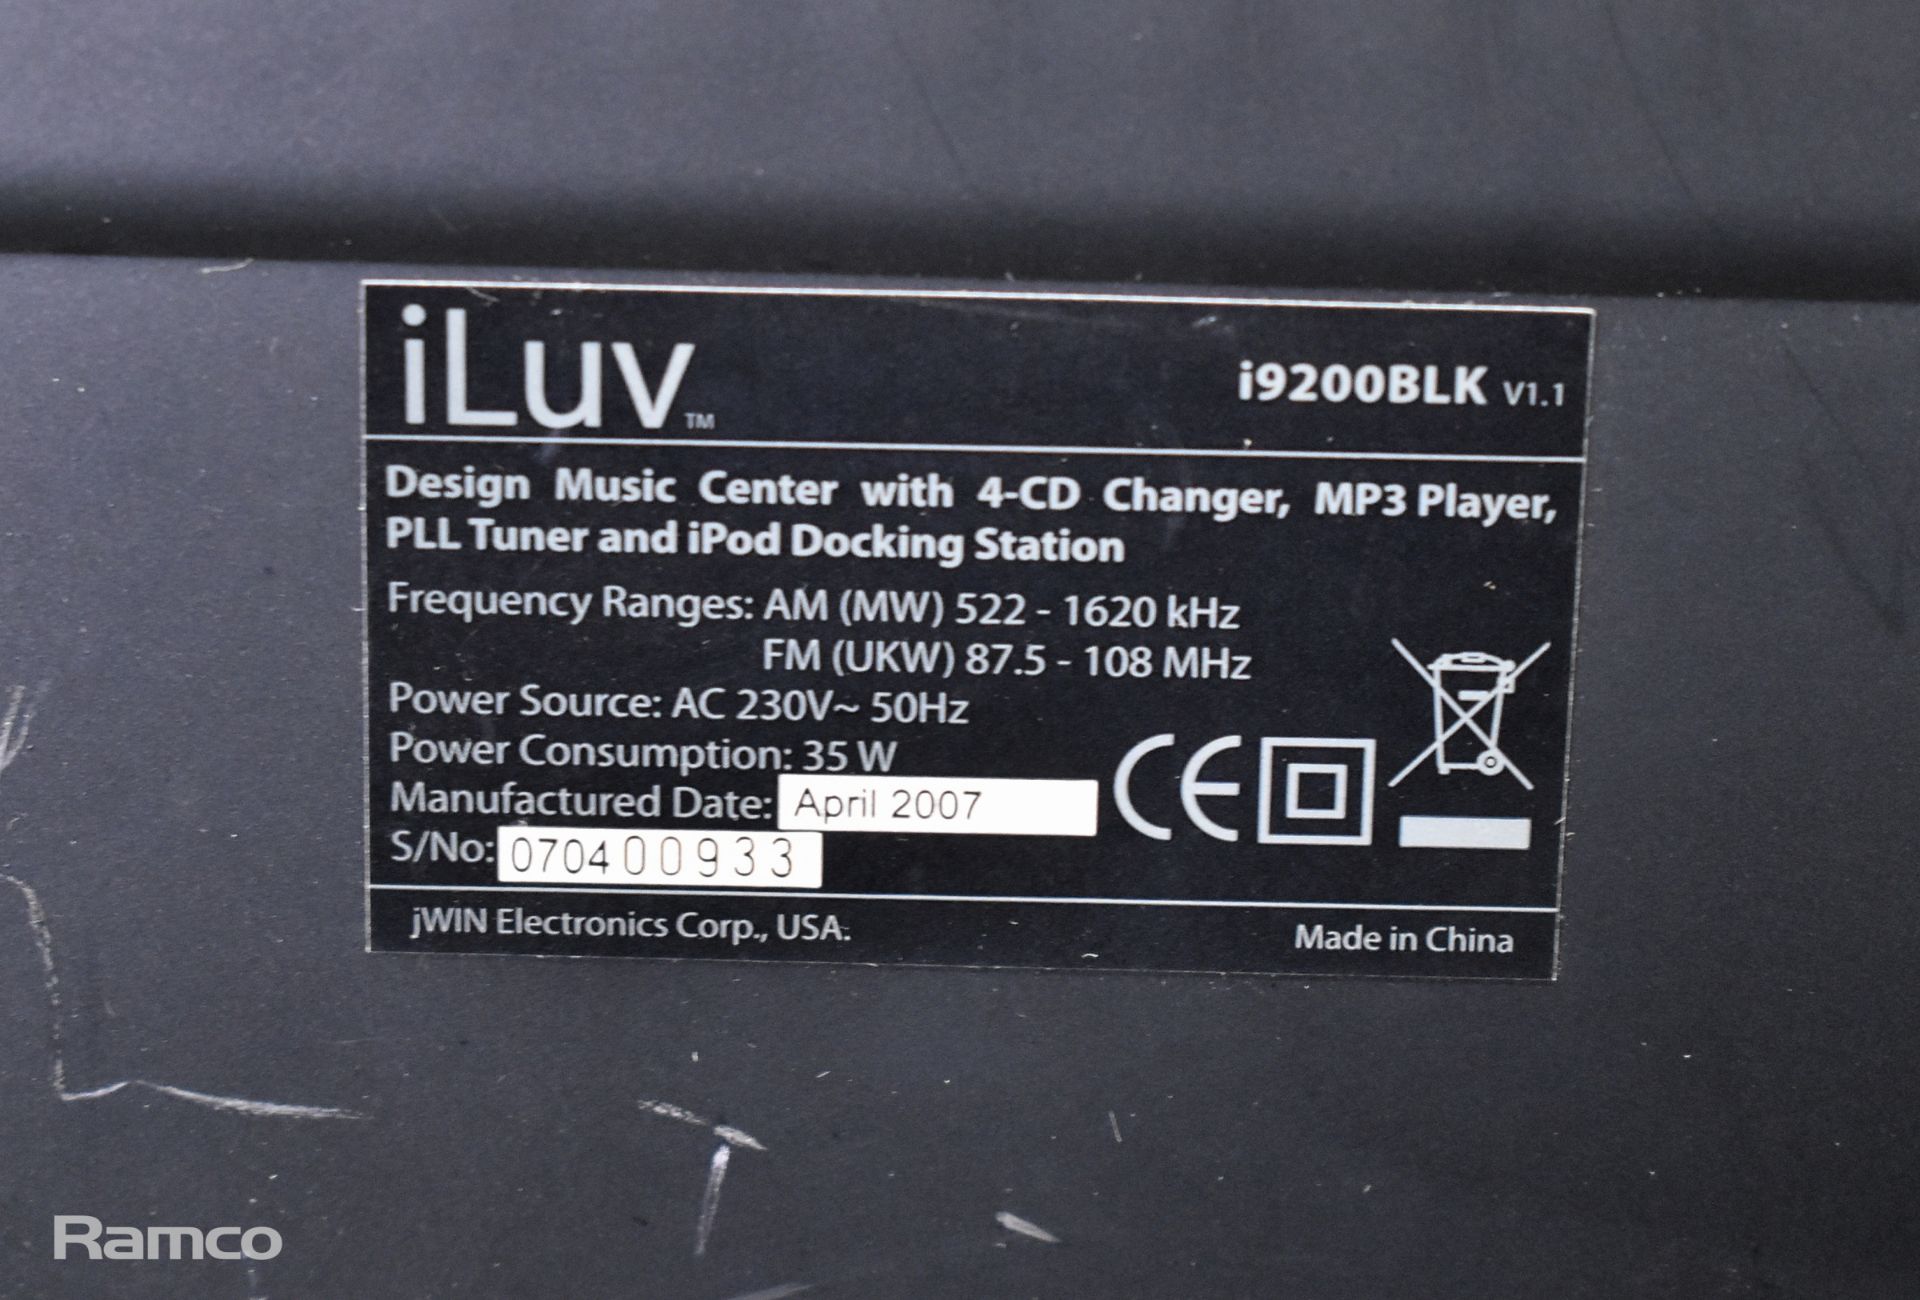 iLuv music centre system - Image 5 of 6